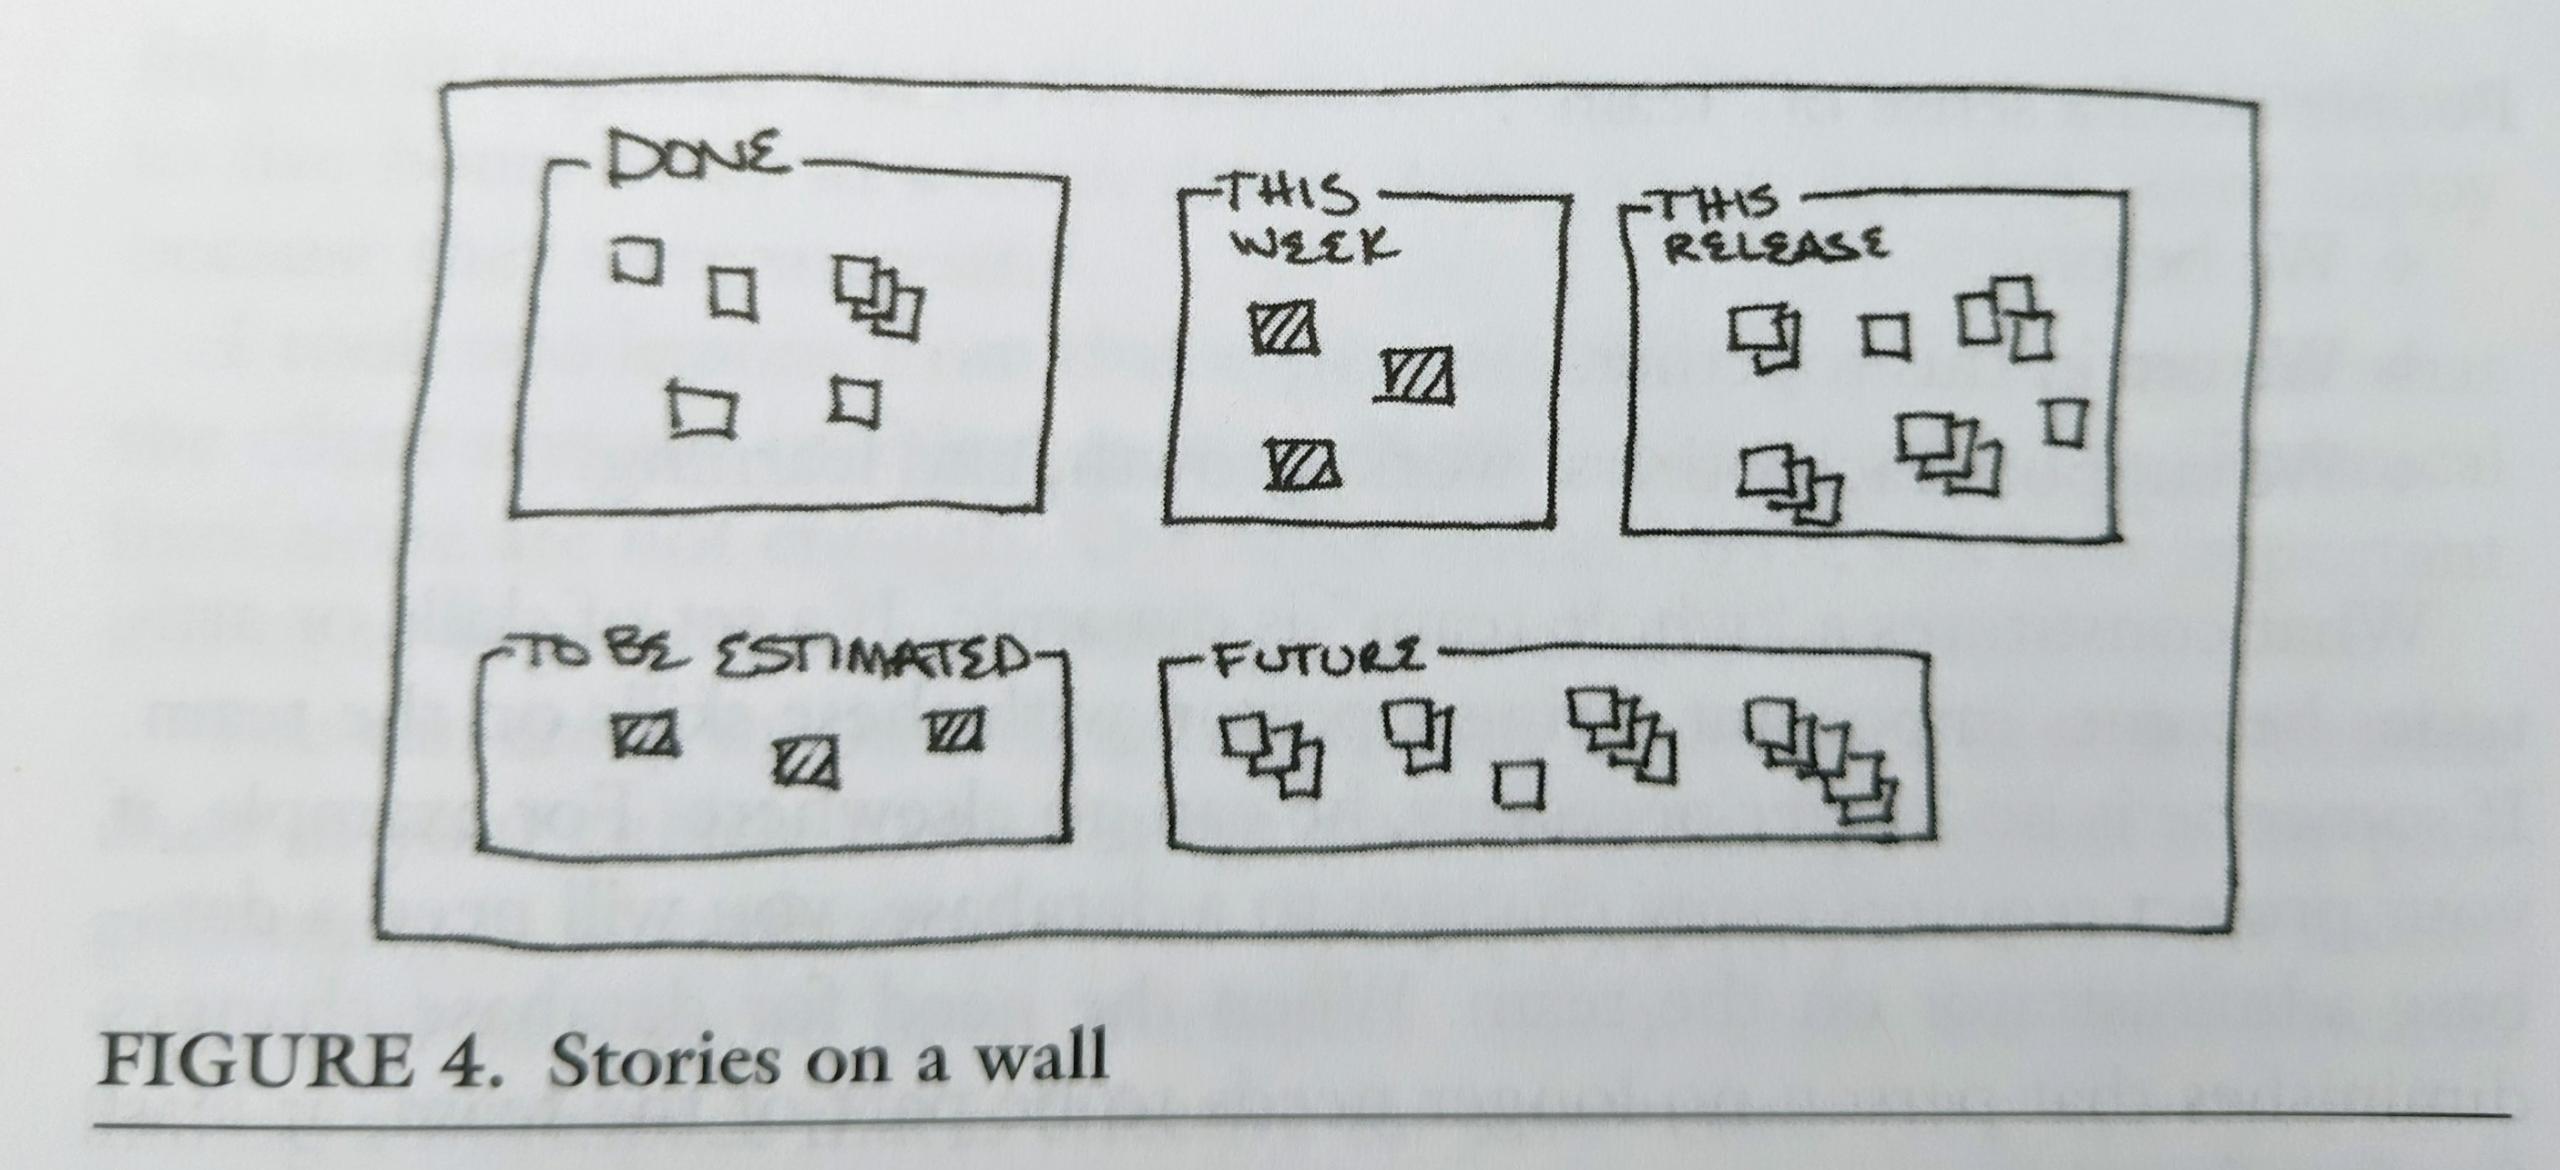 Figure 4 Stories on a wall from Extreme Programming Explained 2nd ed. A wall with index cards grouped into Done, This Week, This Release, To Be Estimated, Future.